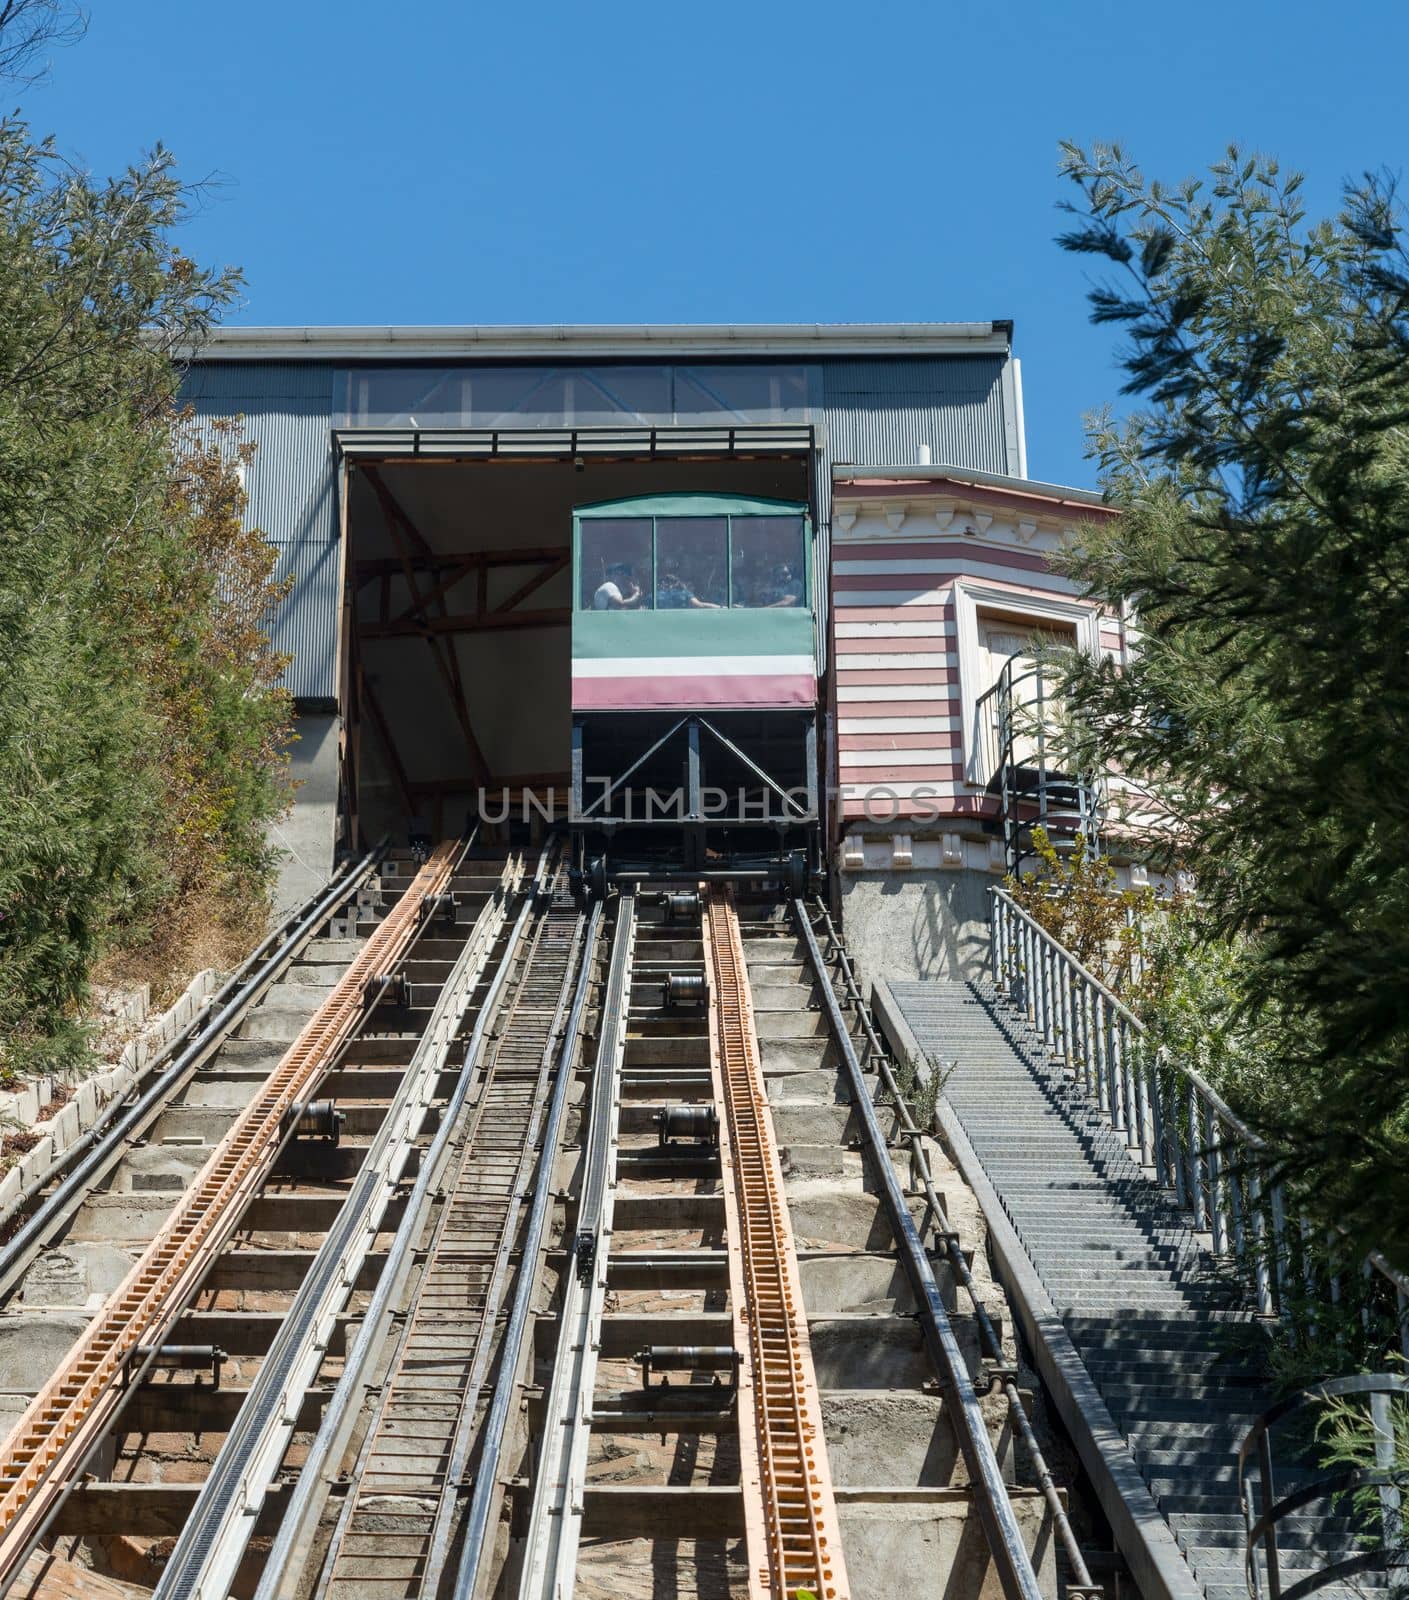 Funicular railway car and track near Sotomayor square in Valparaiso by steheap